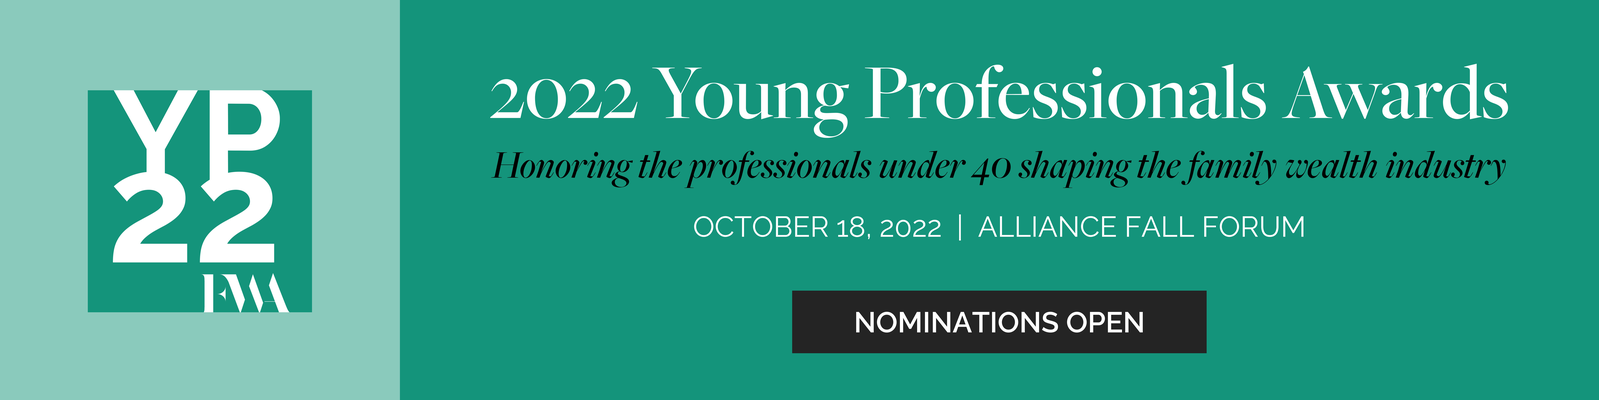 2022 Alliance Young Professionals Awards